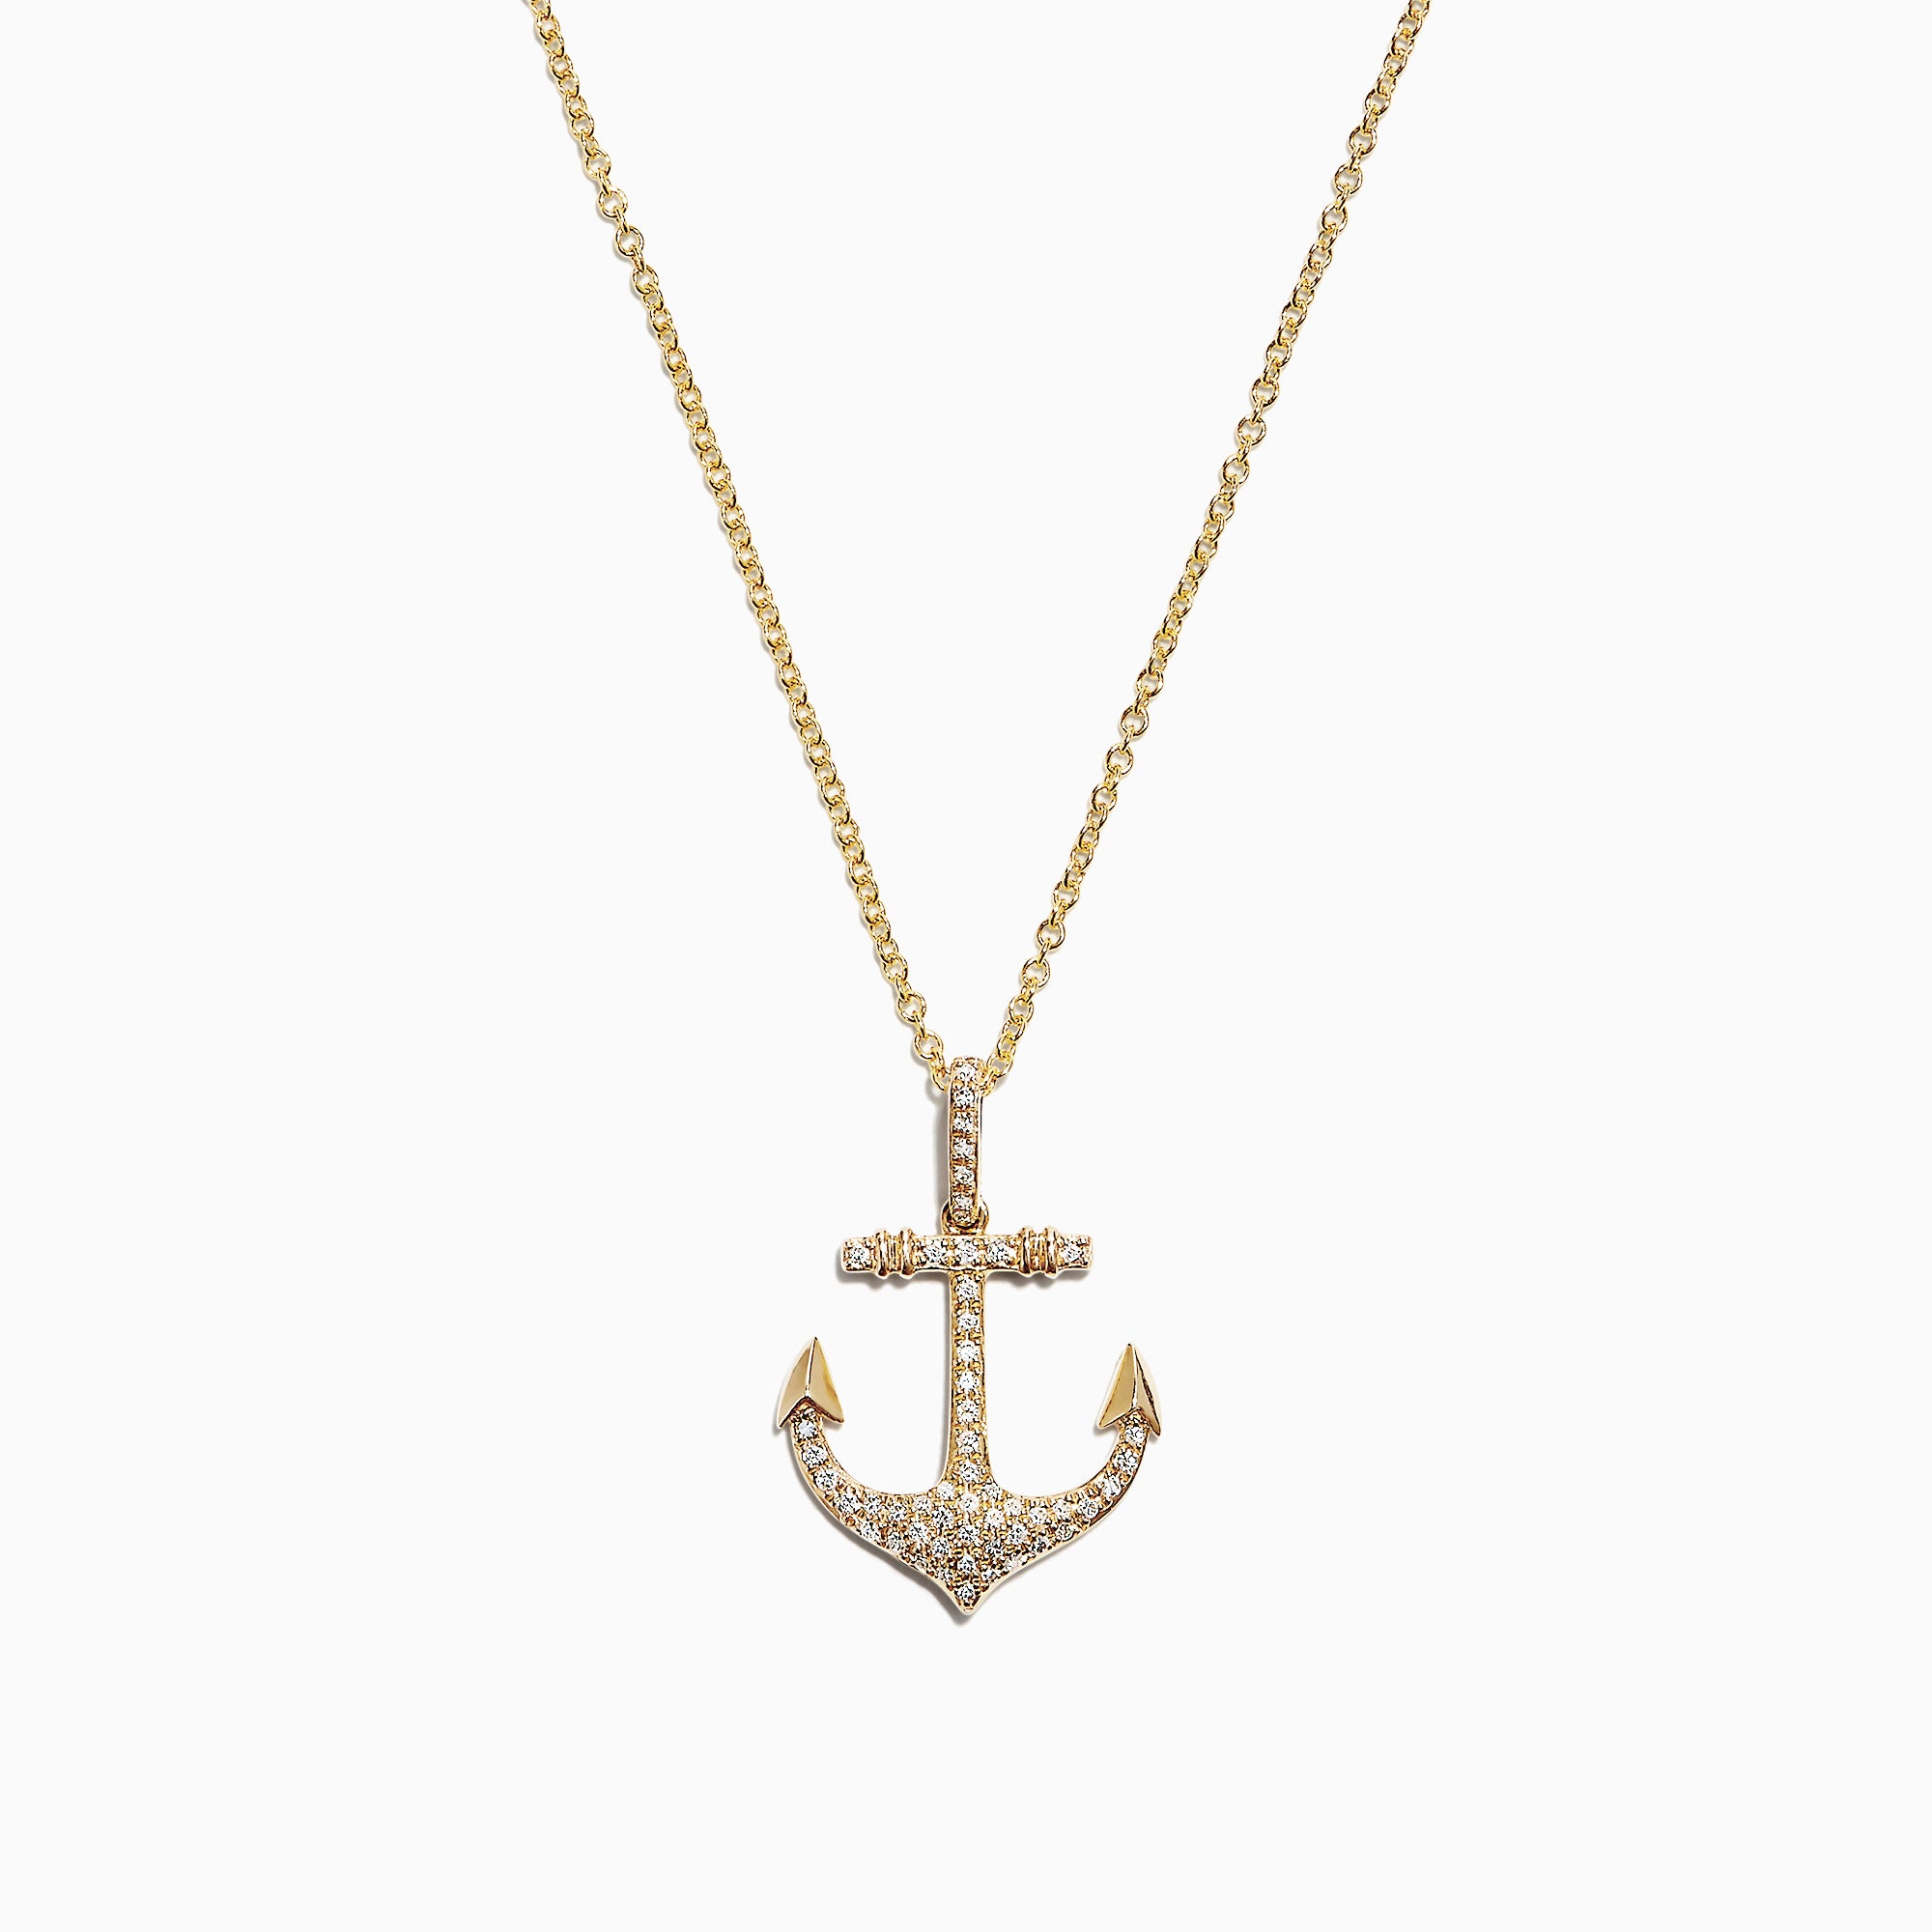 Effy Jewelry: Anchors Away! Shop pave nautical classics | Milled